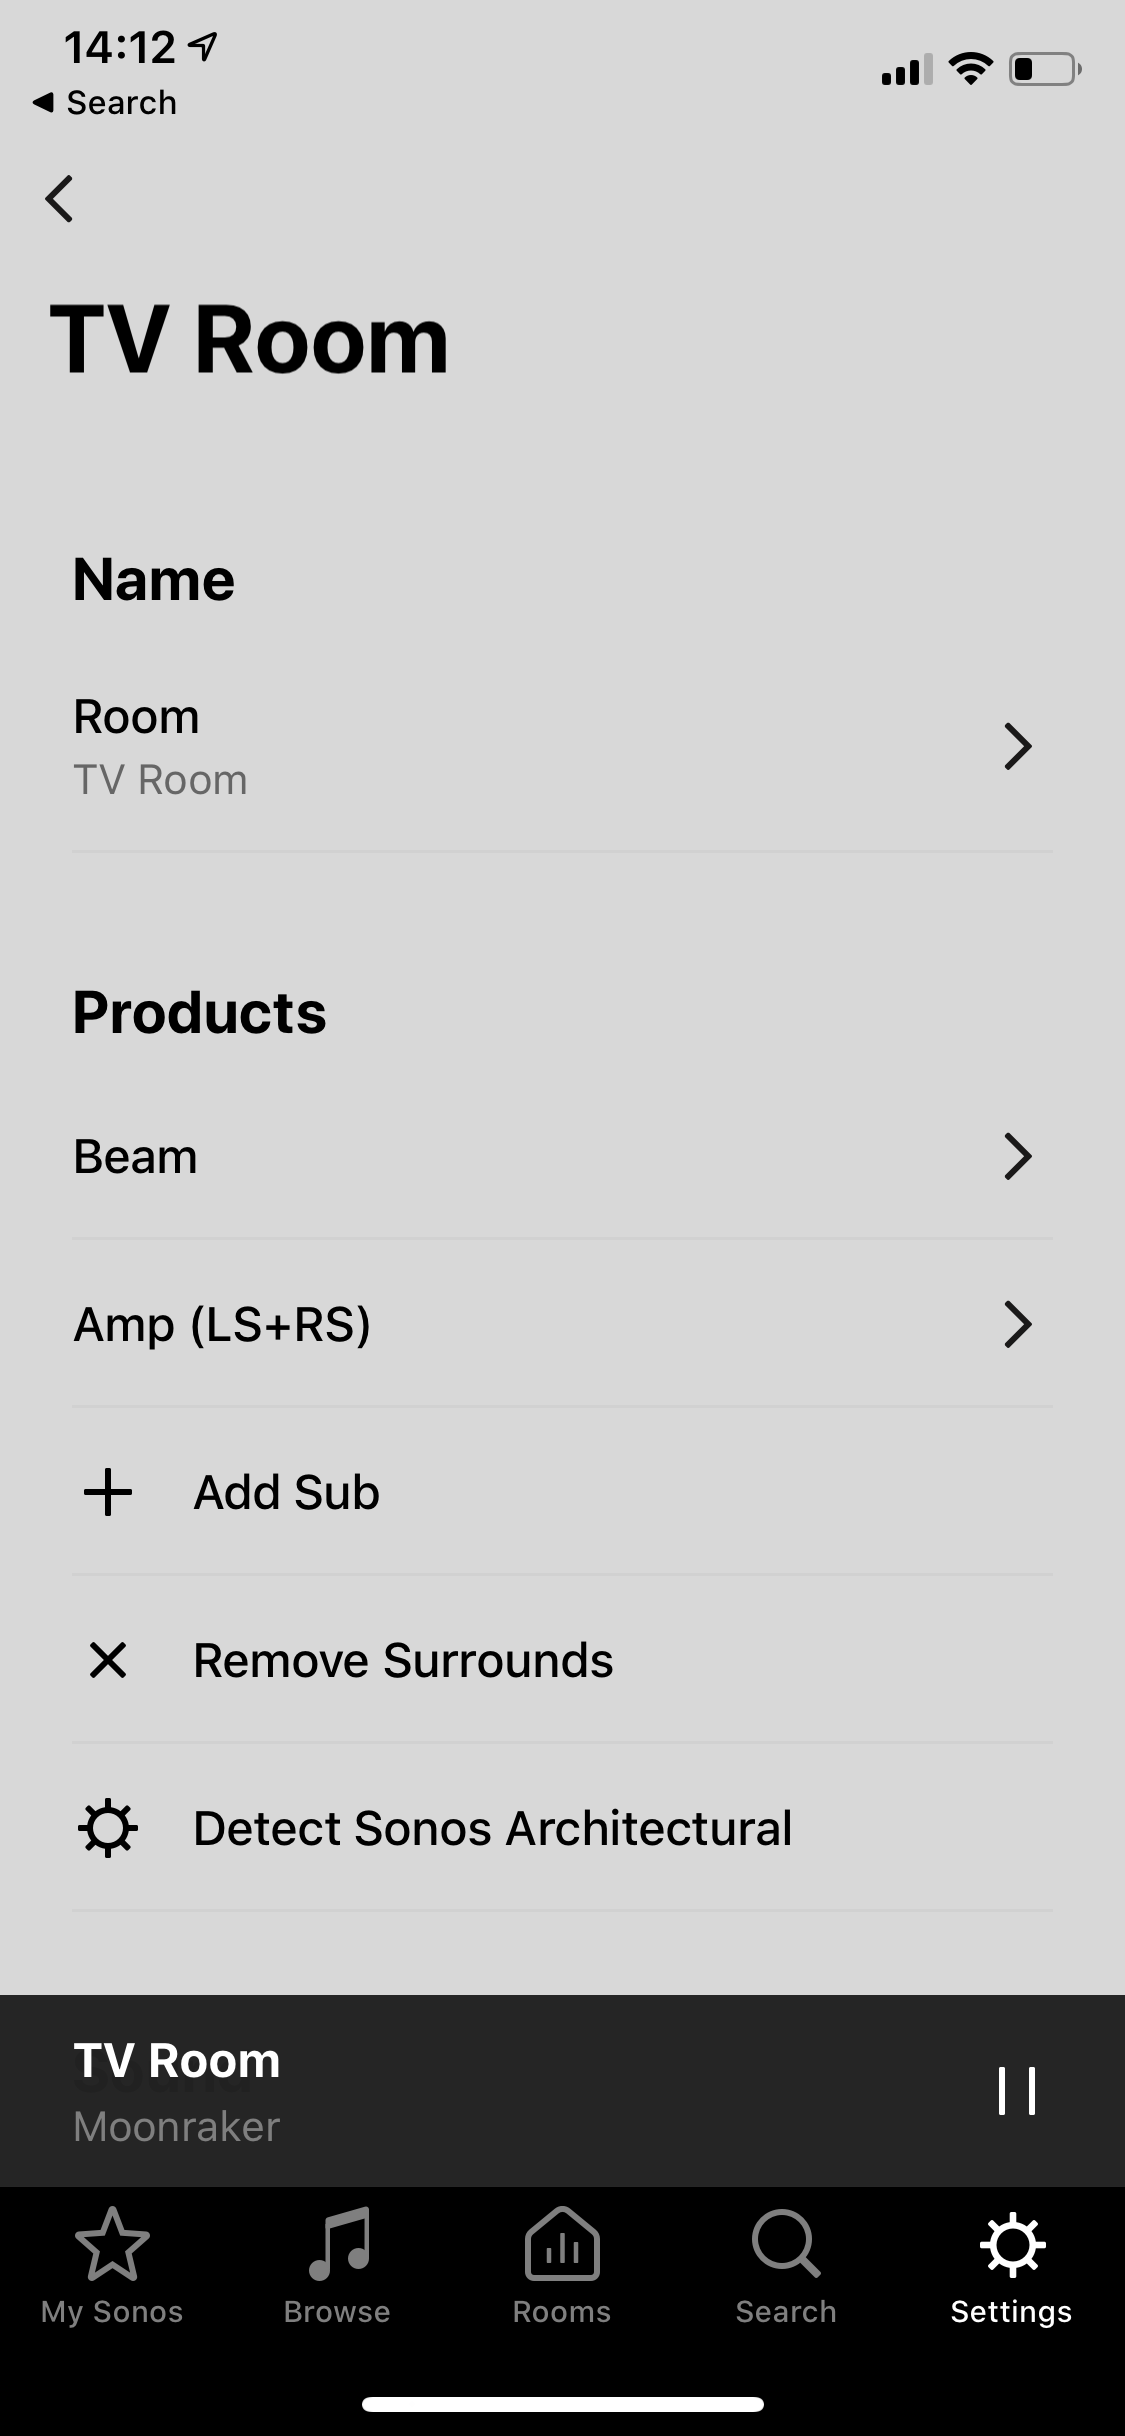 External subwoofer in 5.1, Apple TV 4K throught Airplay2 support | Sonos Community